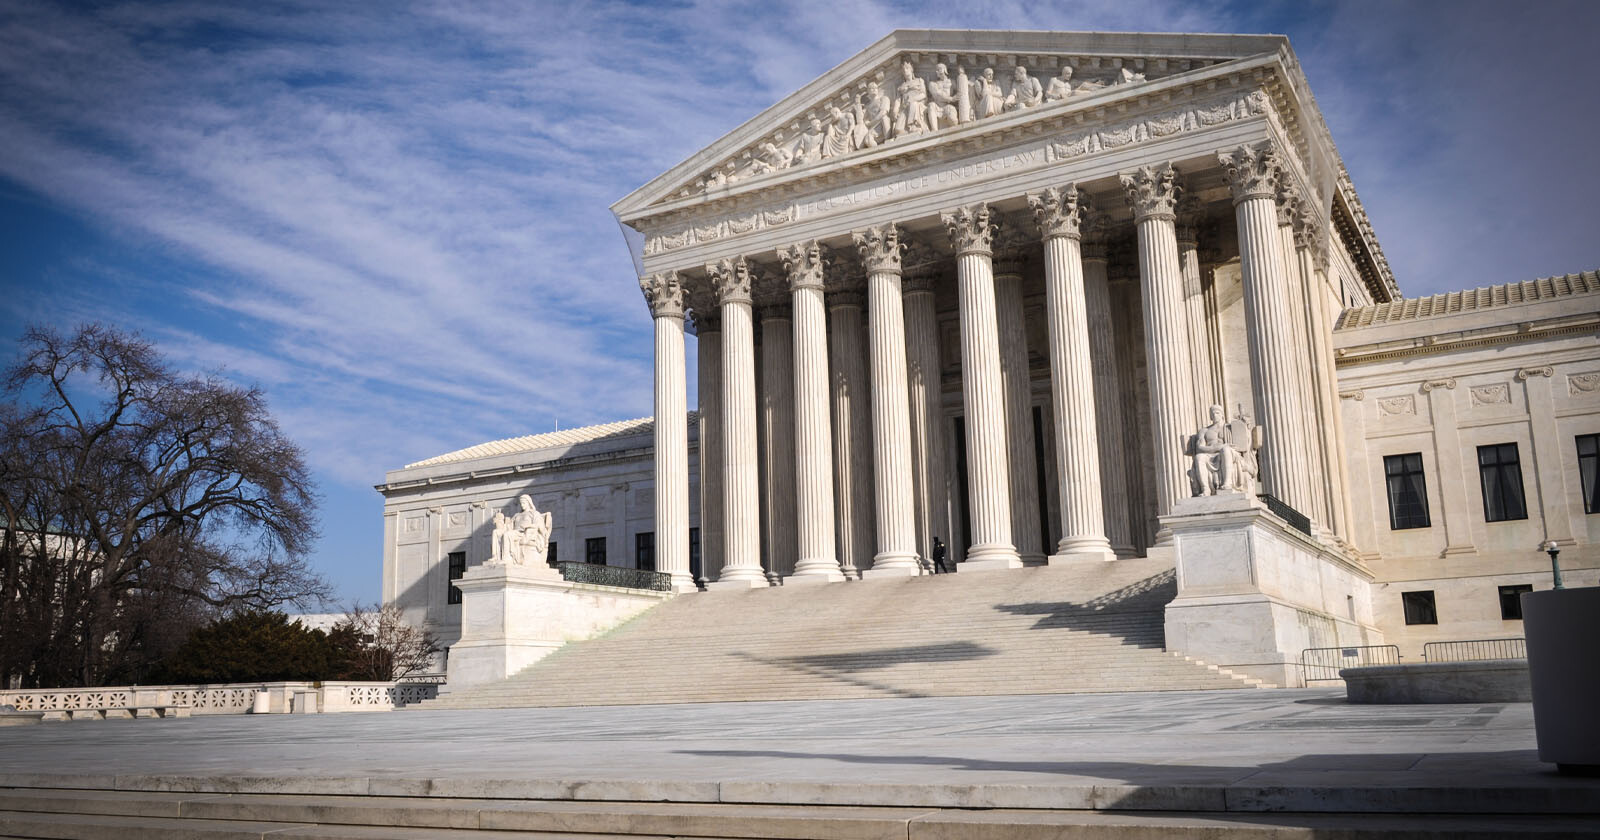 Senators Are Pushing to Install Cameras Inside the Supreme Court